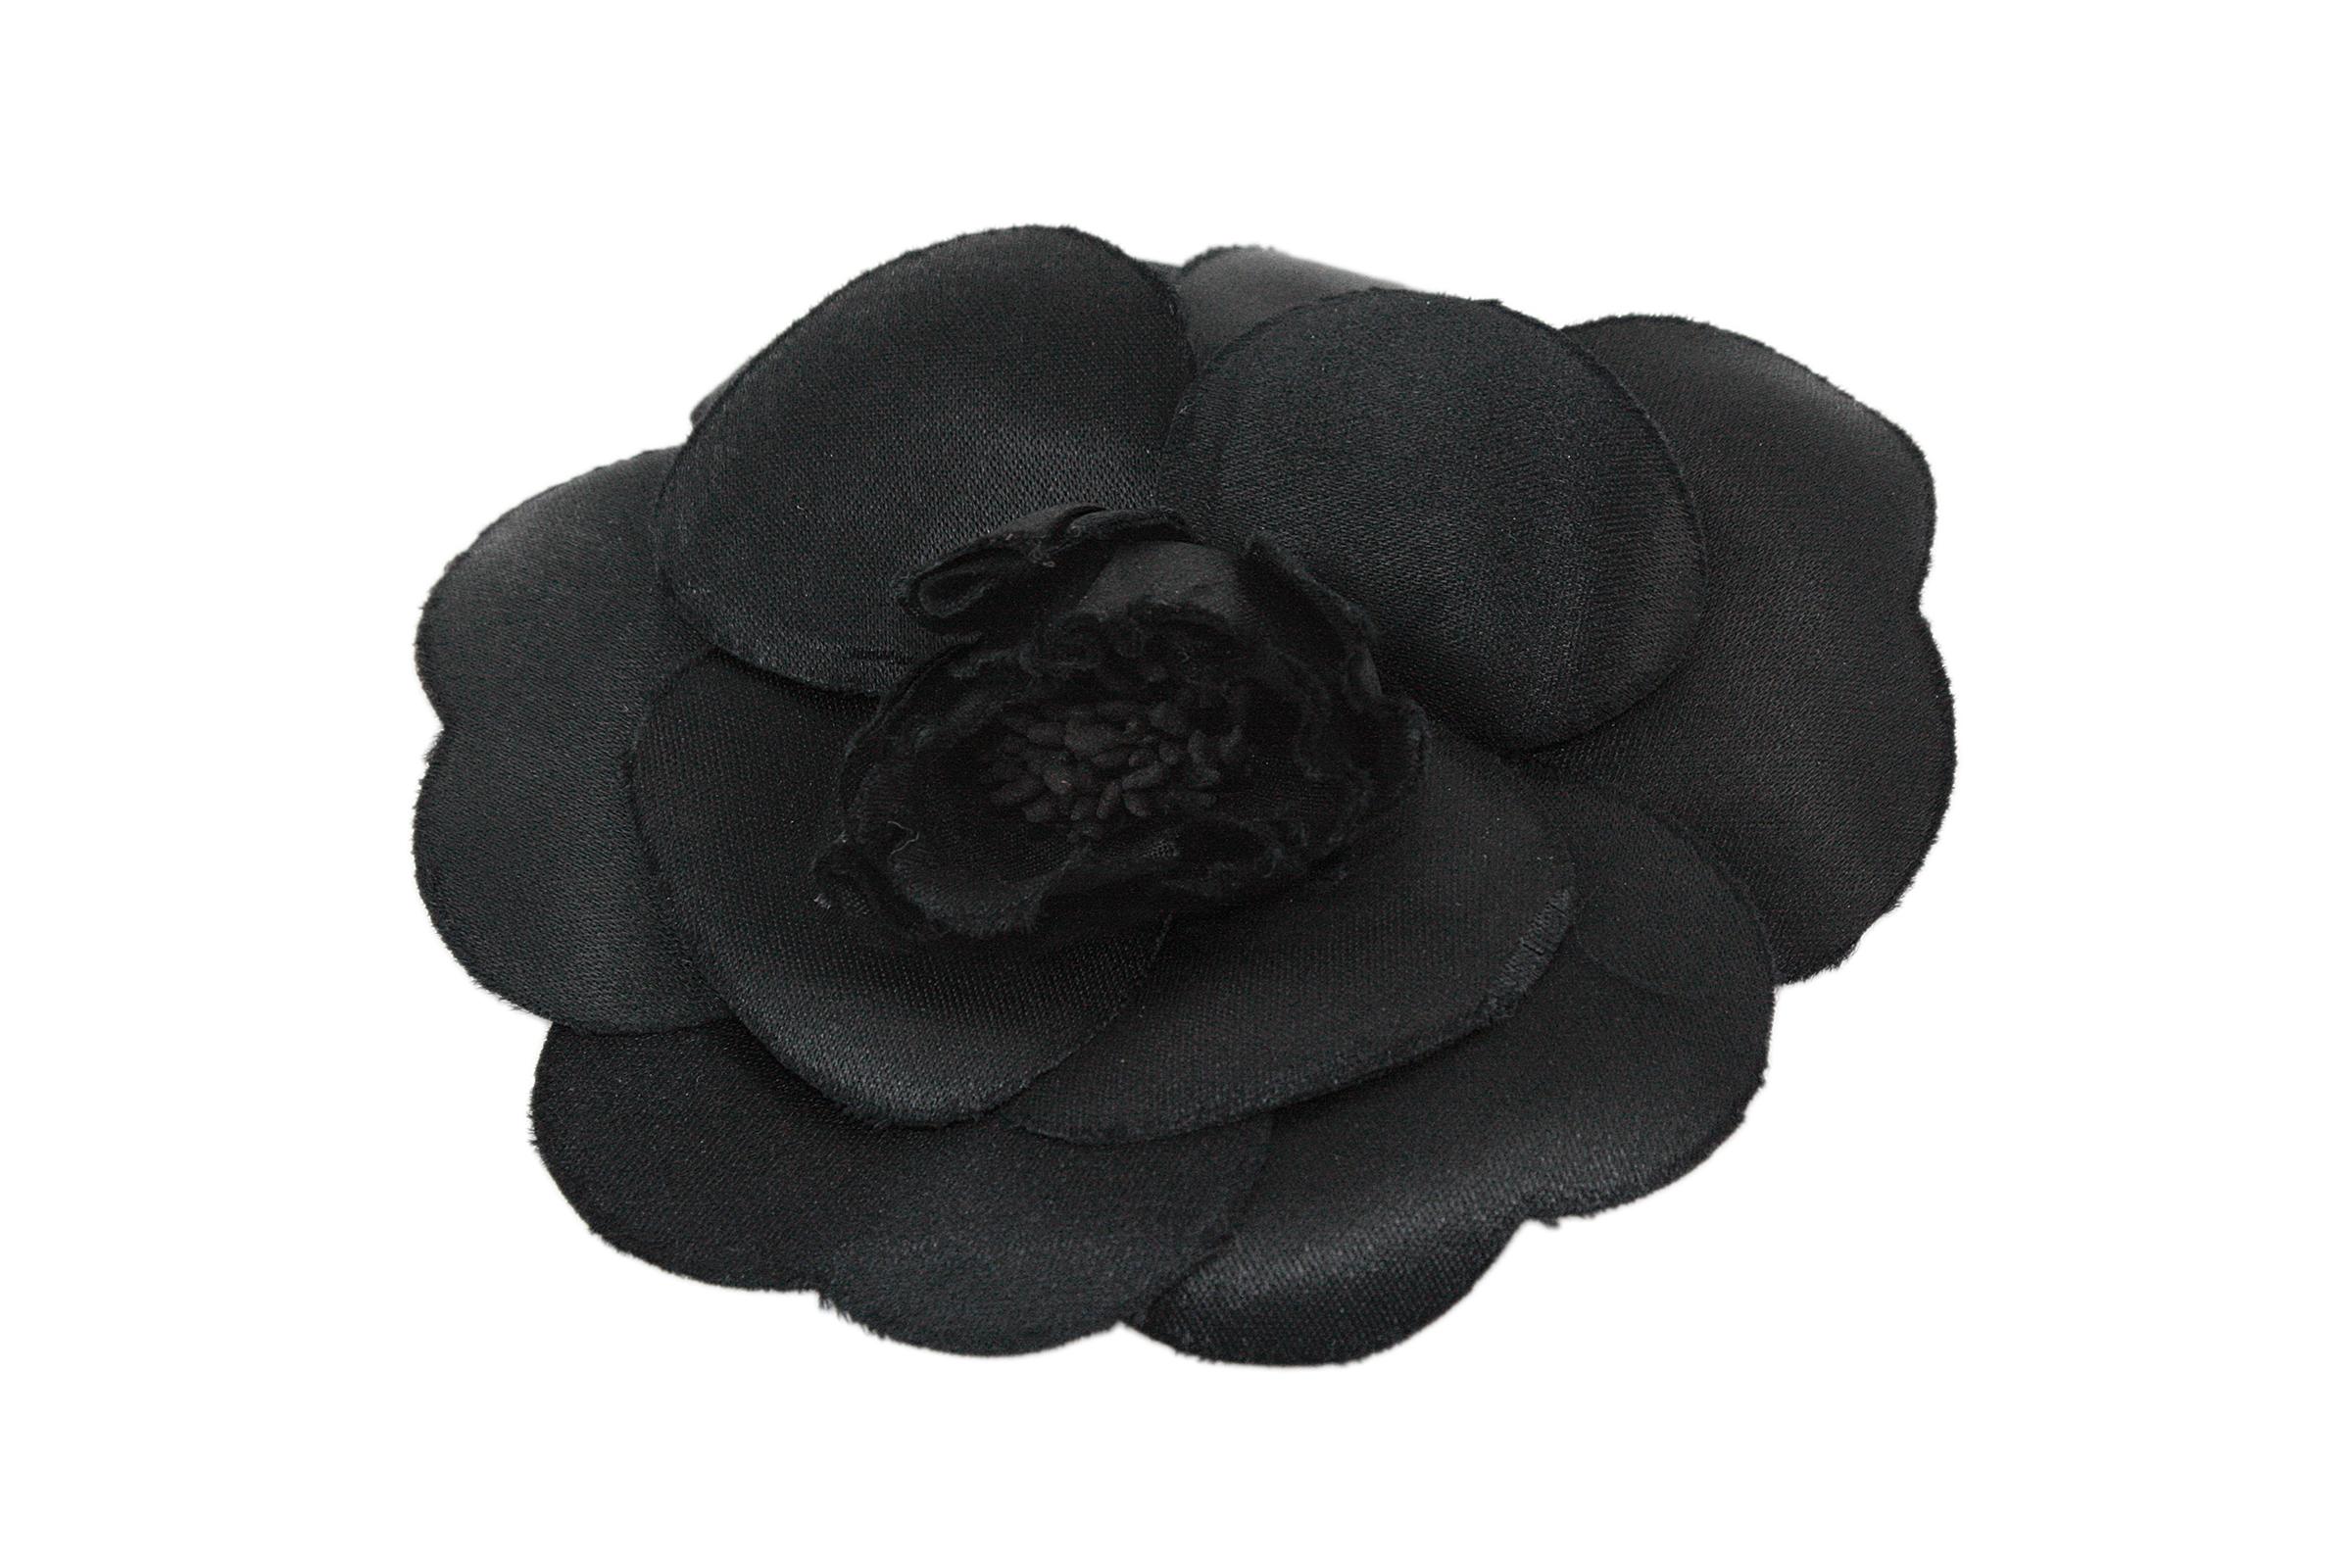 Chanel camellia brooch
Black silk fabric 
Silver needle clasp closure
Made in France 